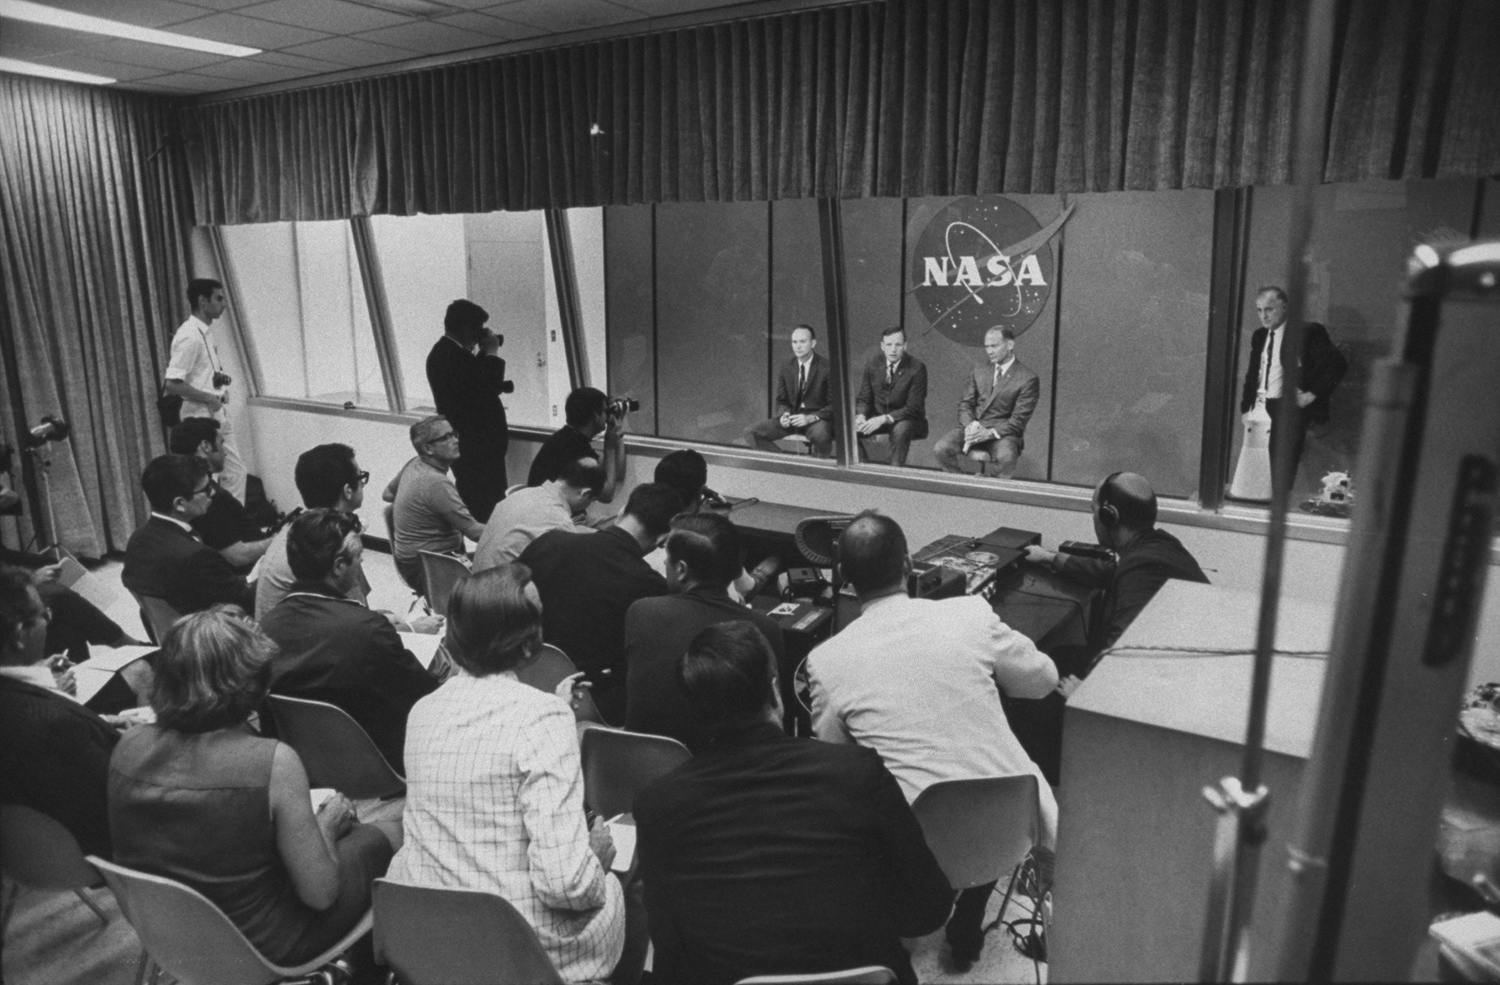 Collins, Armstrong and Aldrin inside a glass-enclosed cage to preserve their post-mission quarantine, July 1969.